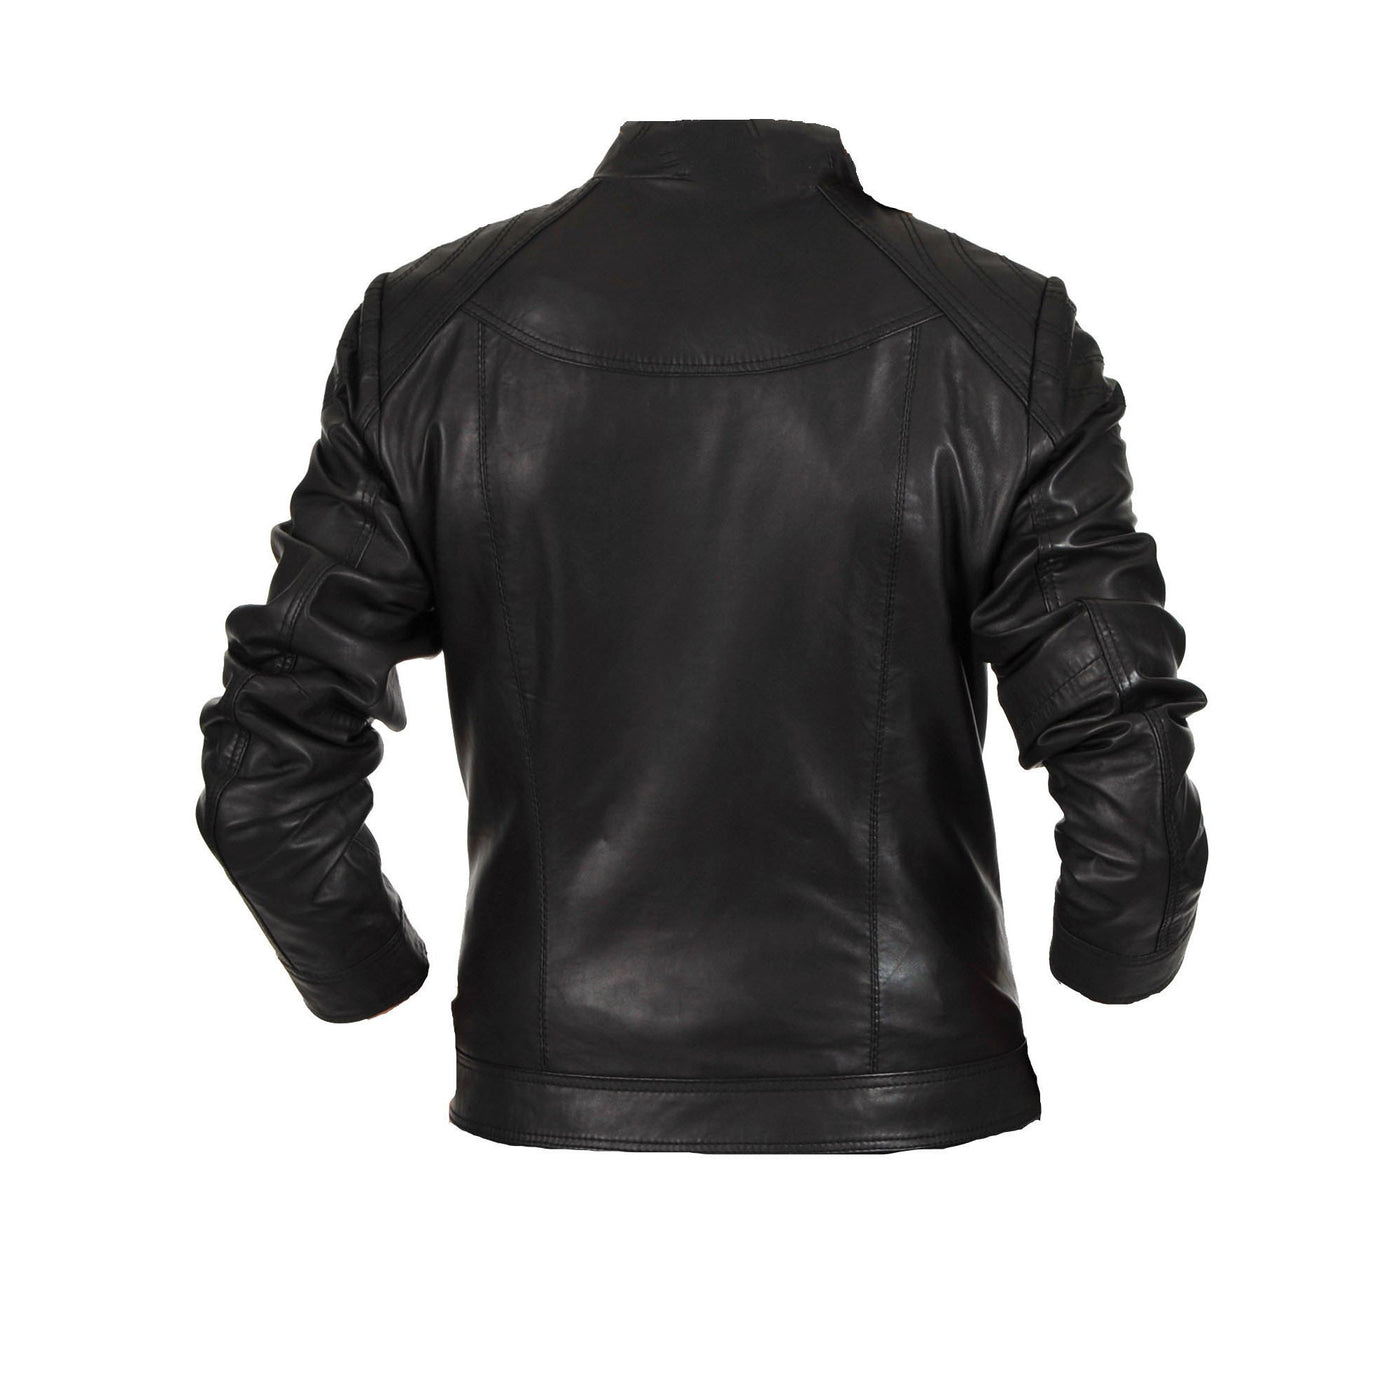 Black double breasted jacket with straight collar - Lusso Leather - 2